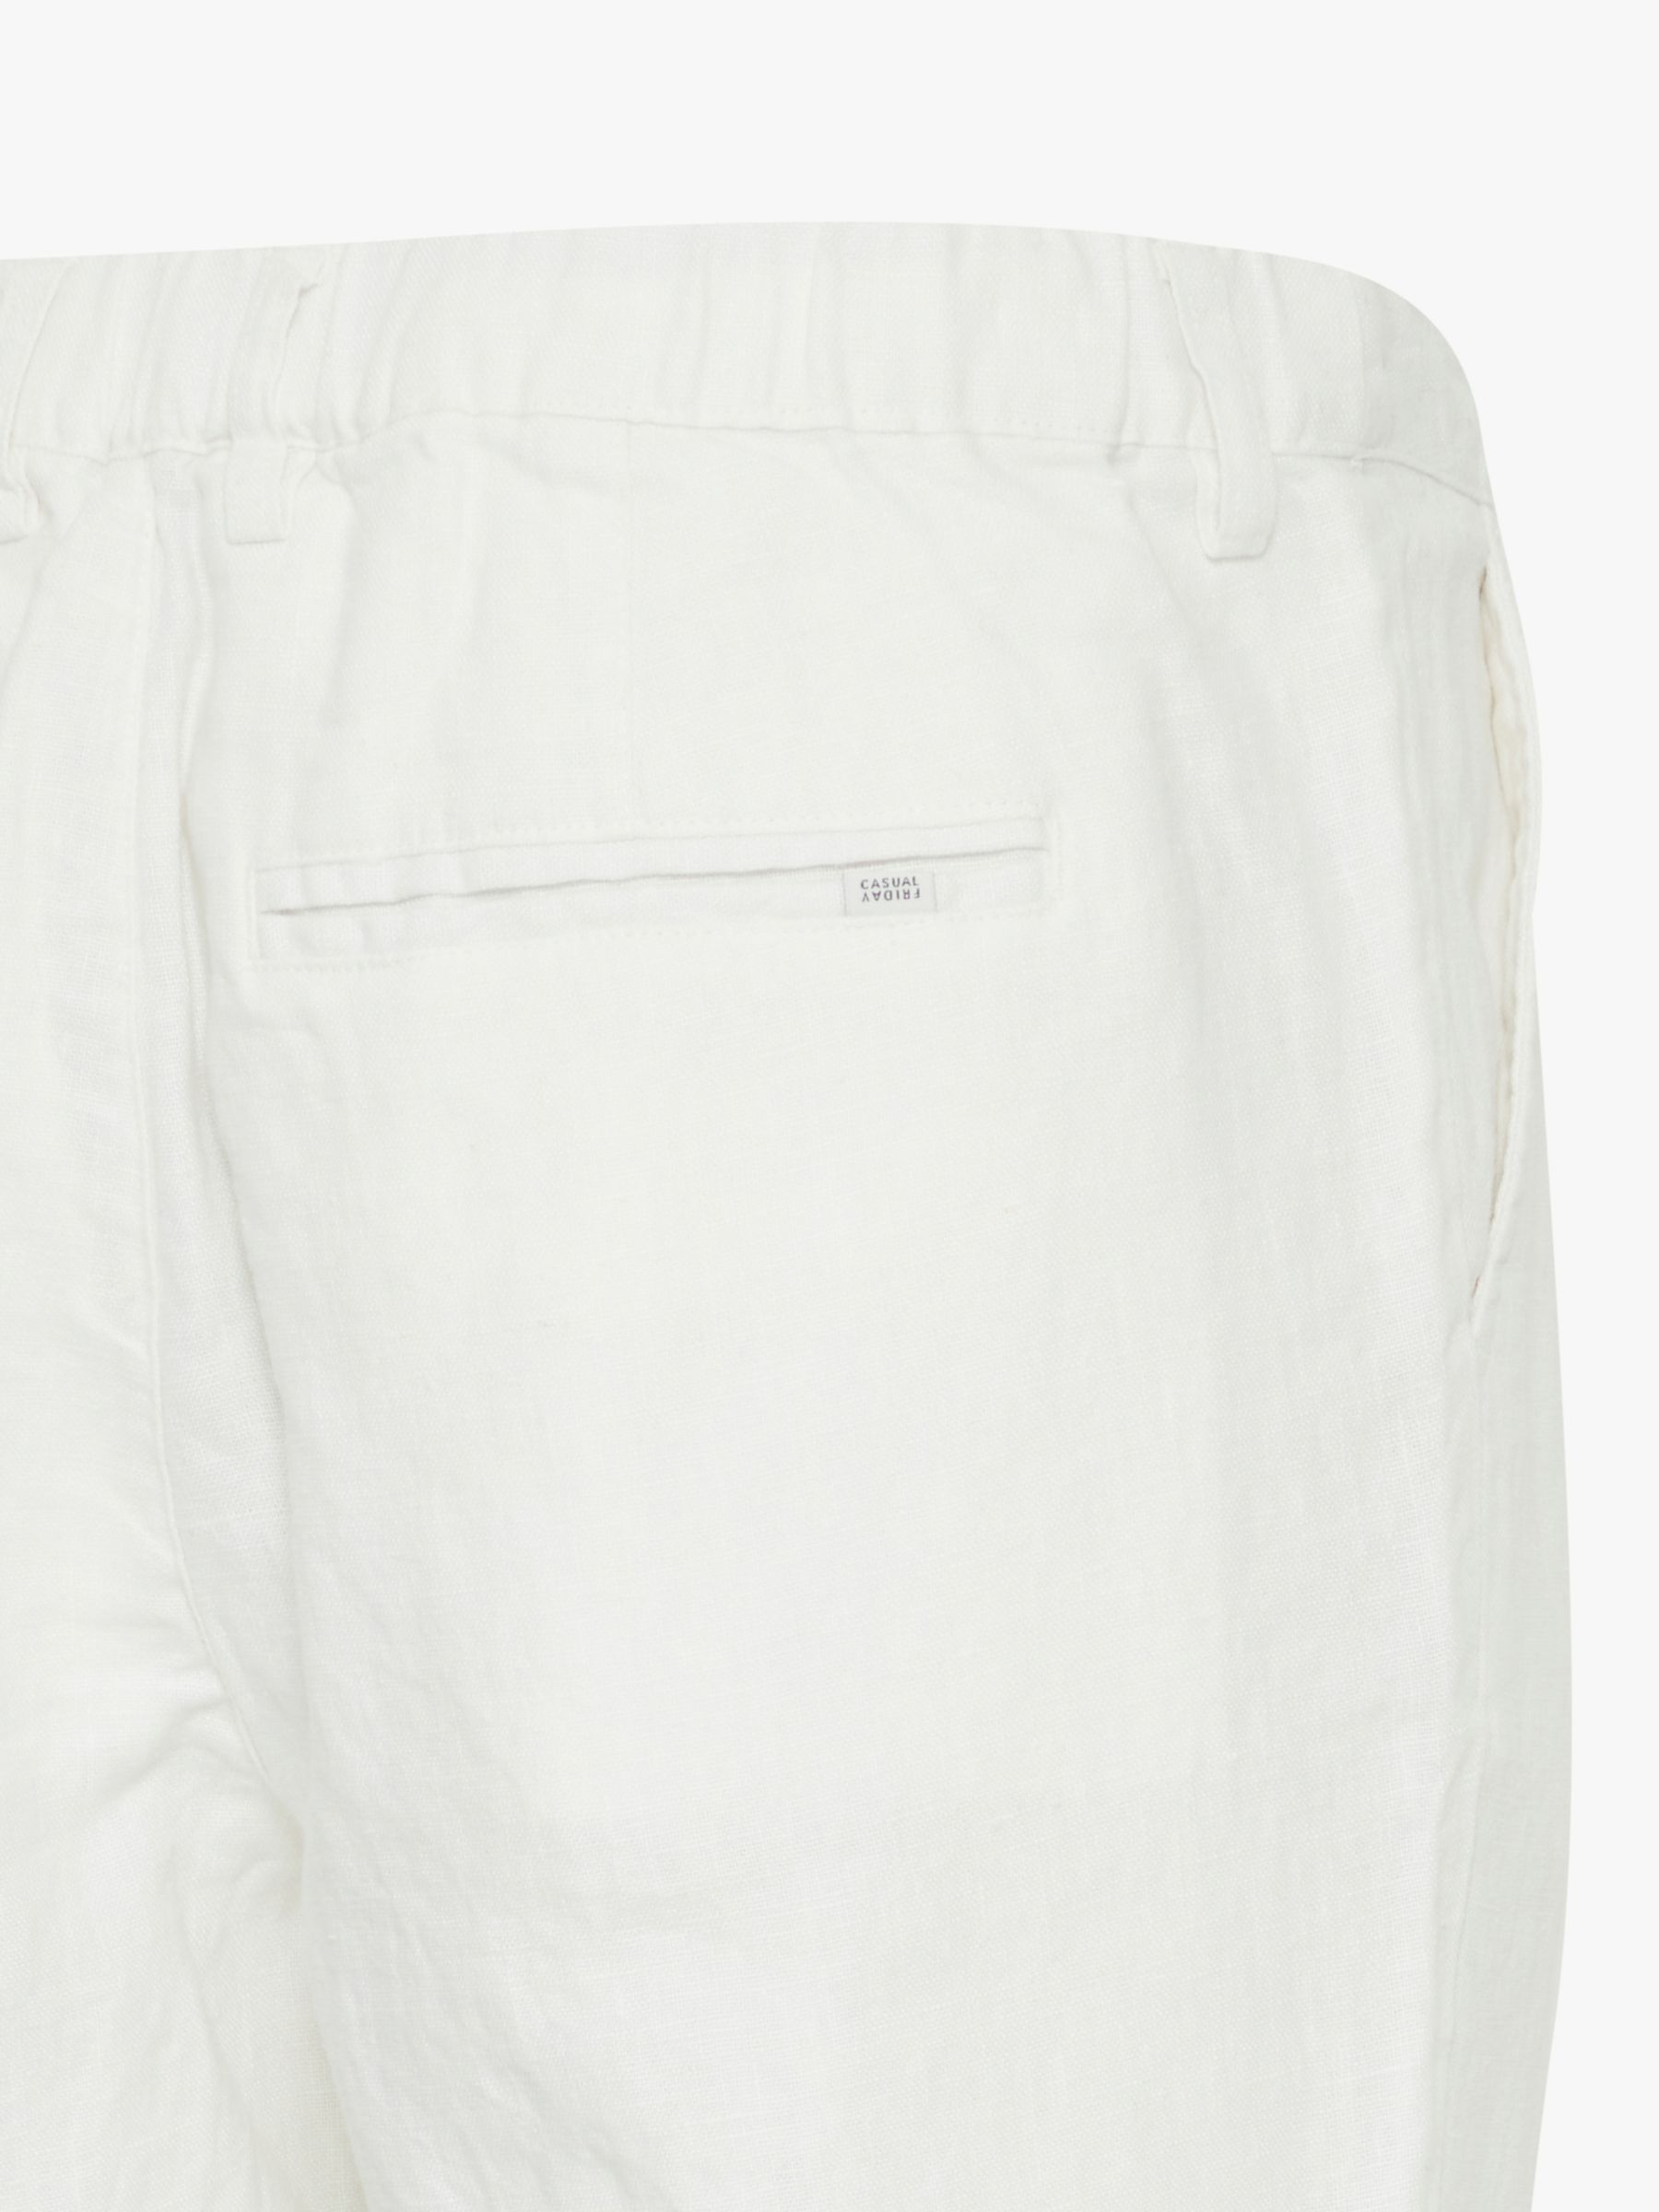 Casual Friday Pandrup Regular Fit Linen Trousers, Snow White, 28R